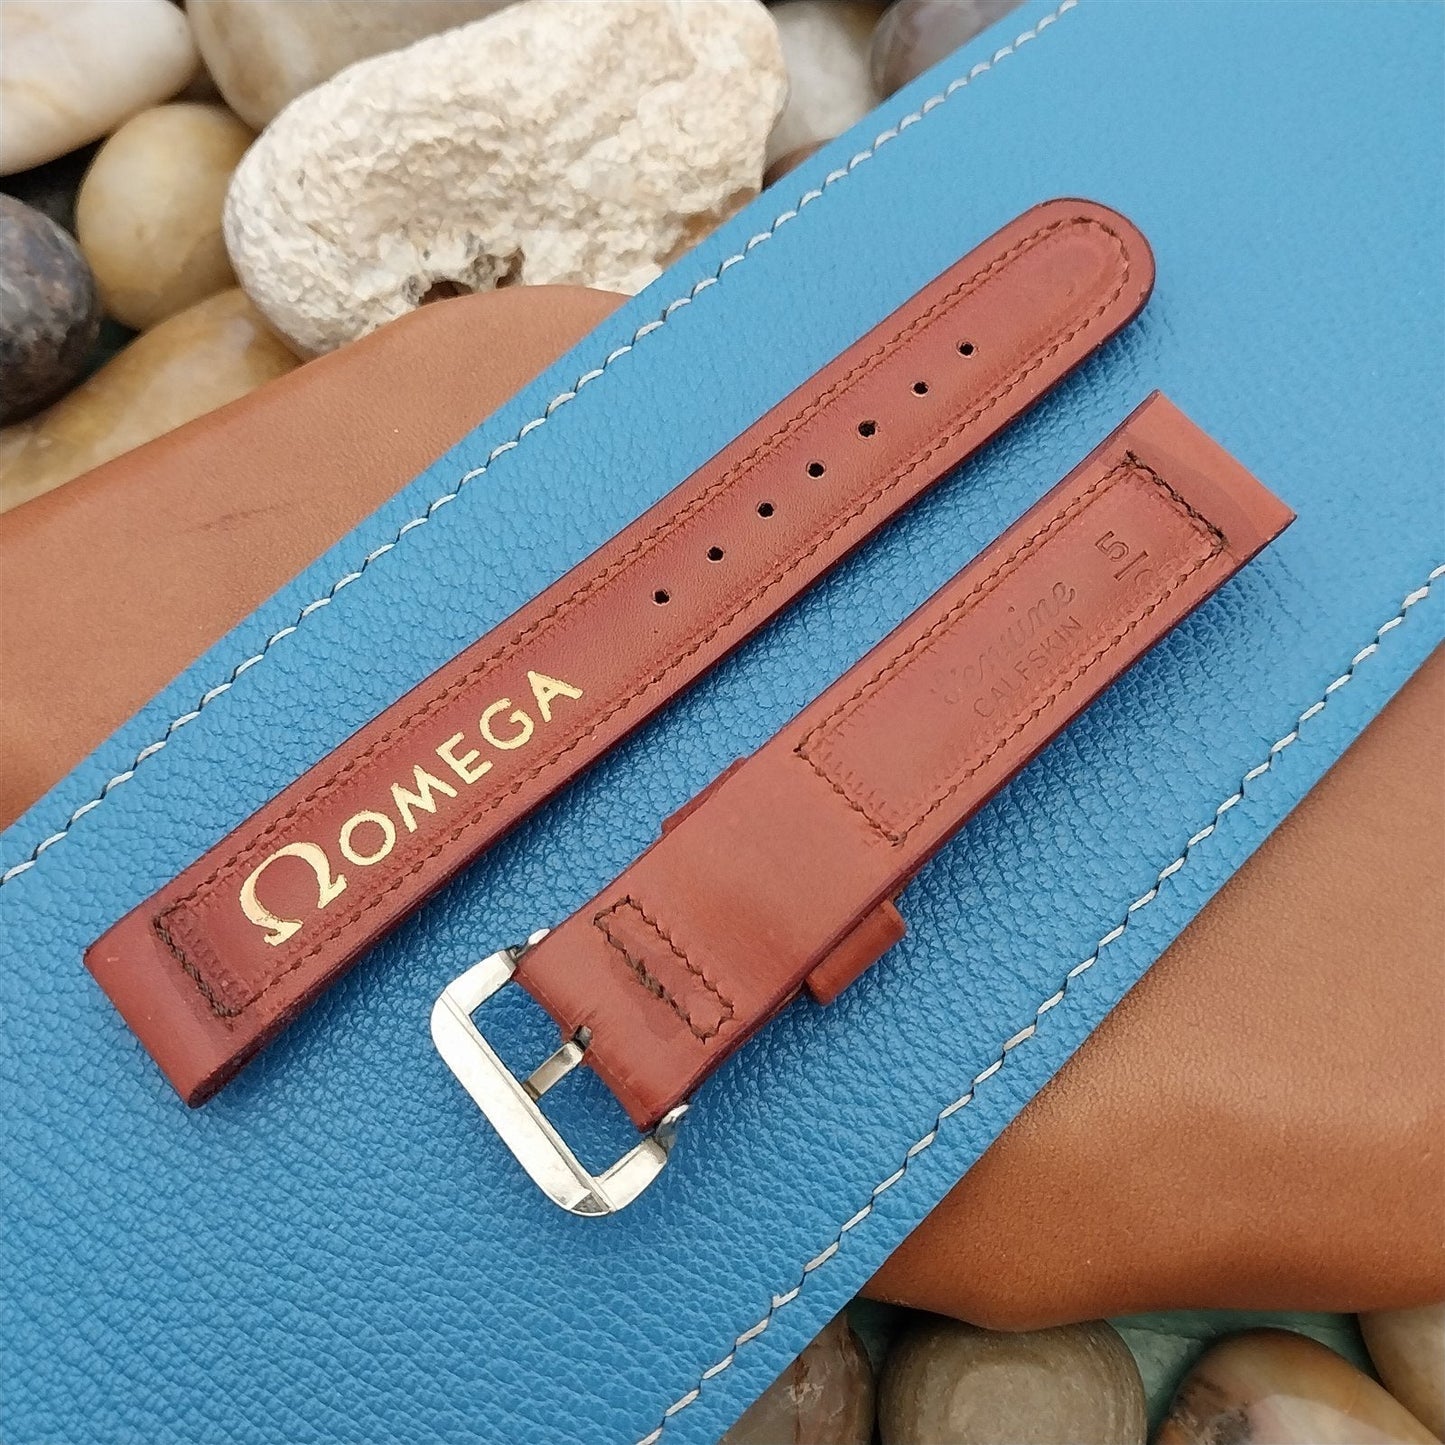 Omega 5/8" Brown Calf Leather Classic Kreisler nos 1950s Vintage Watch Band